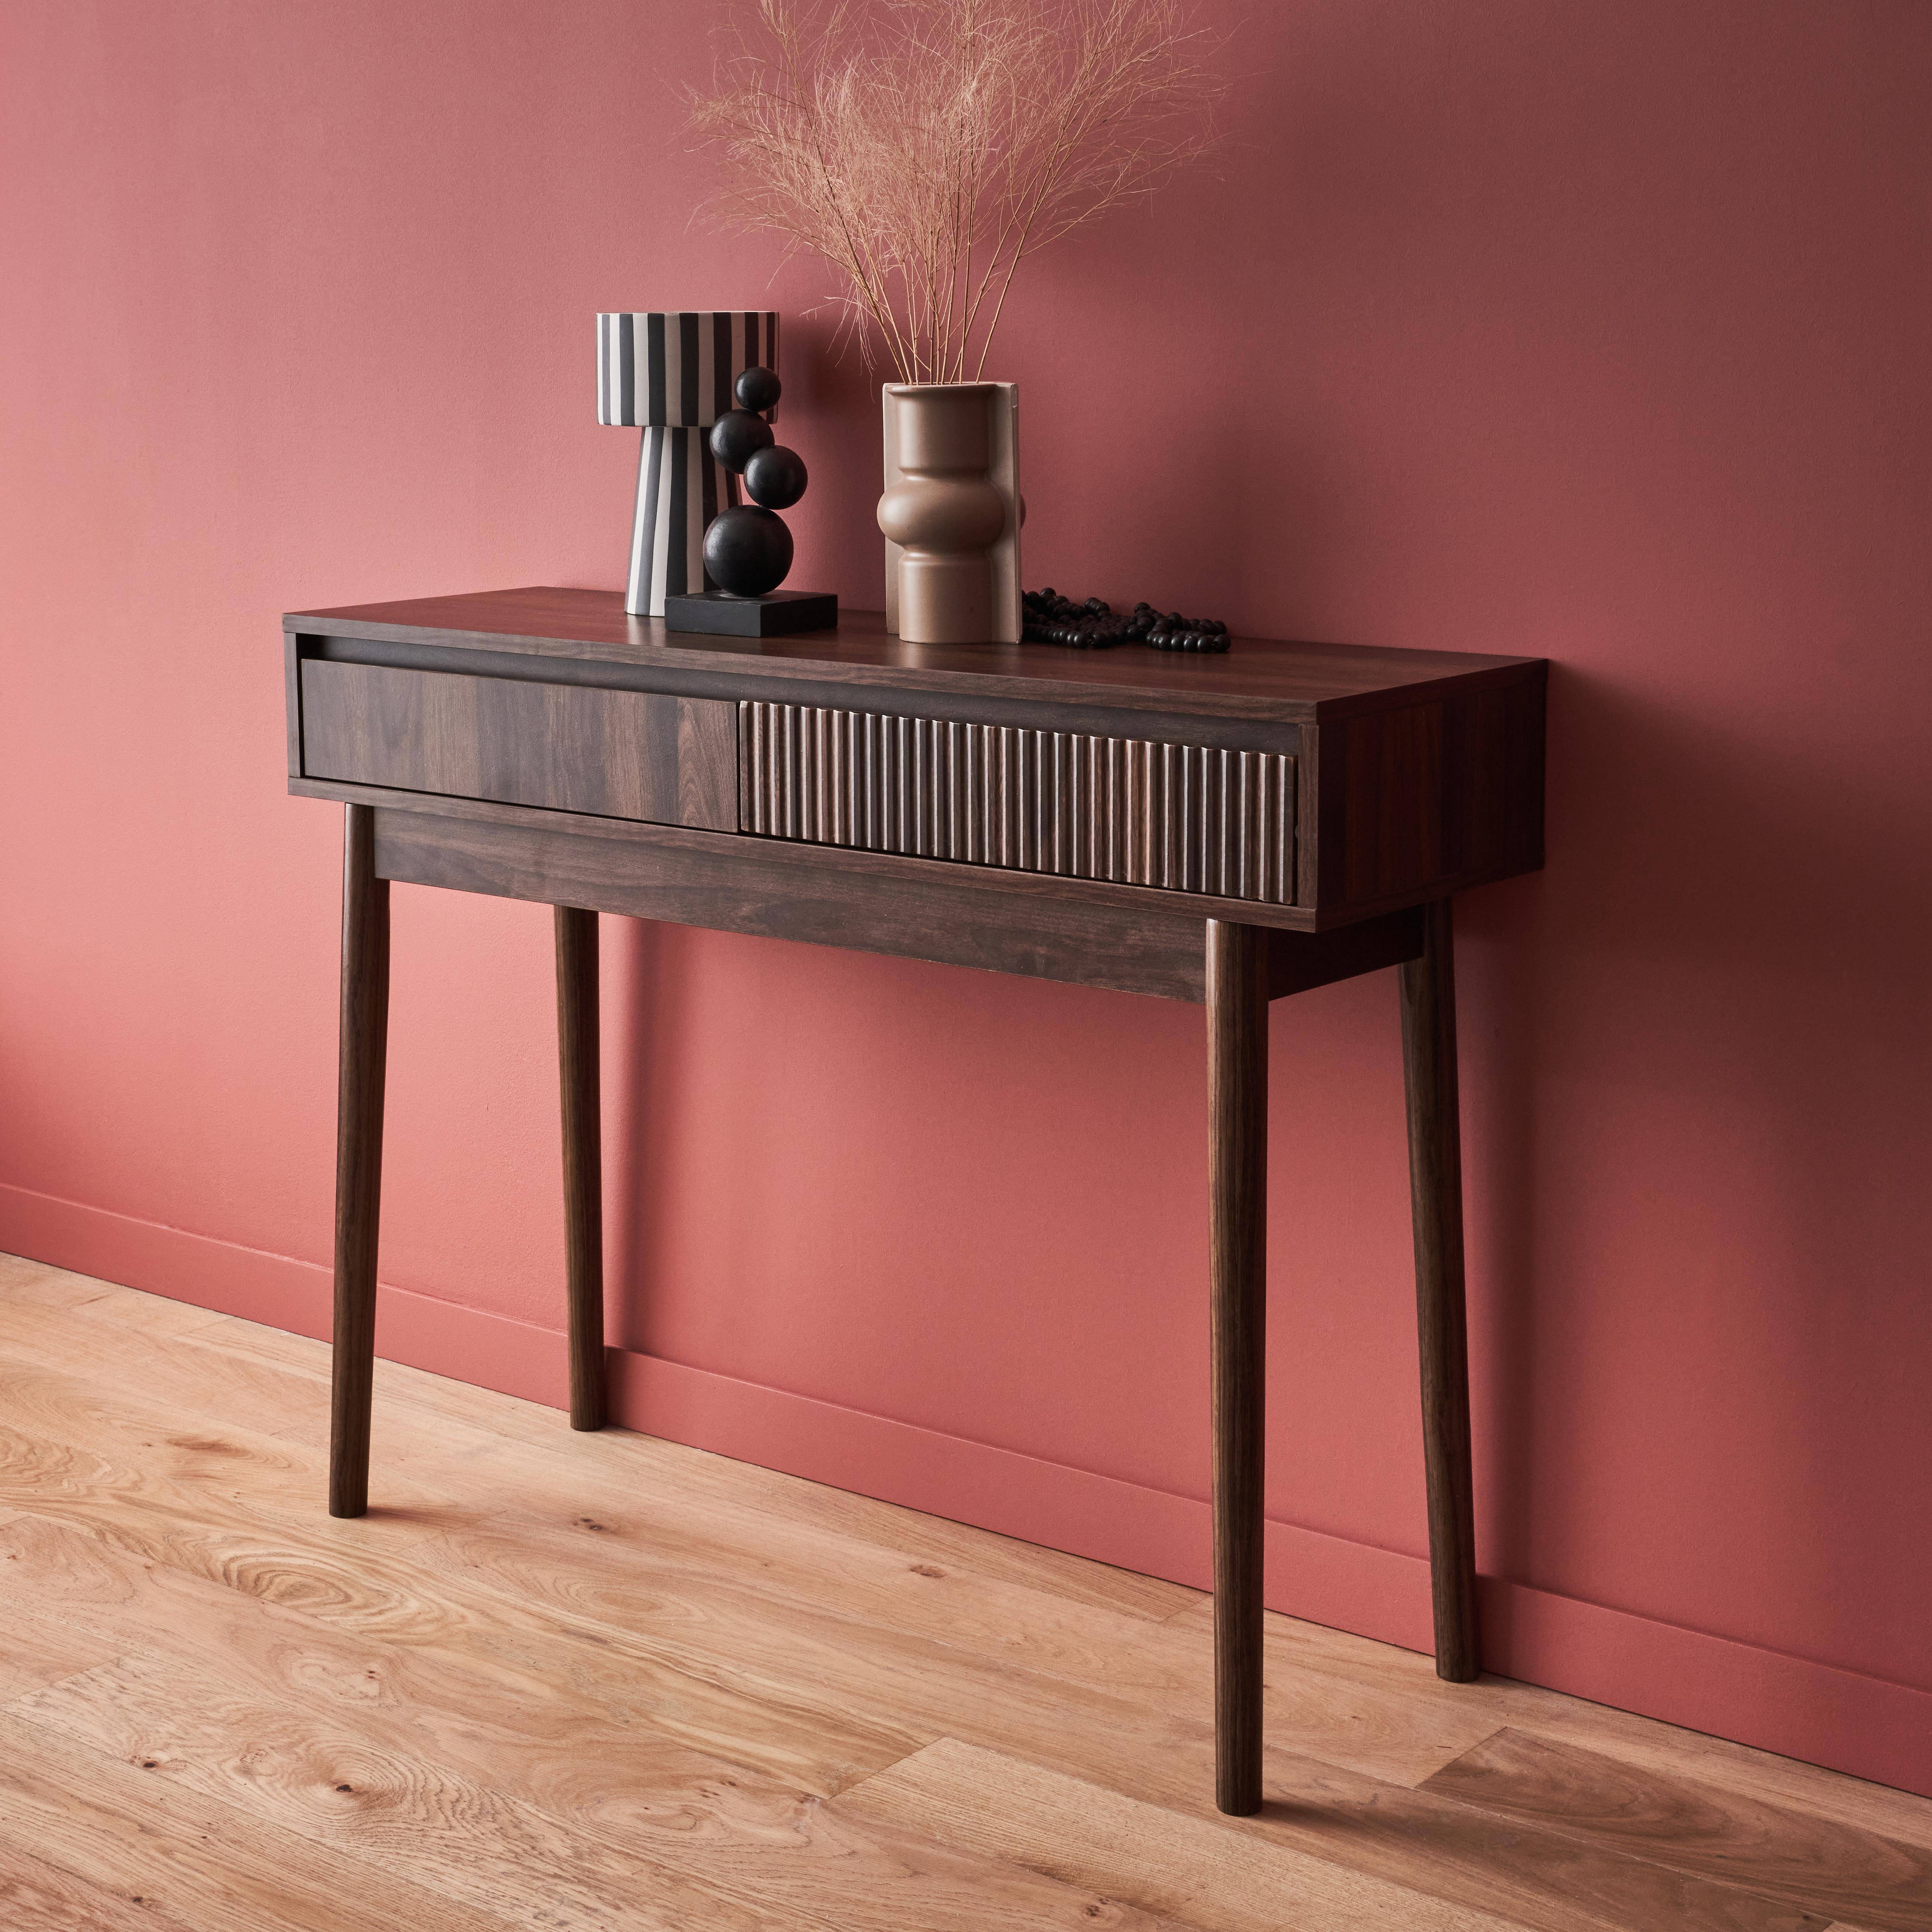 Grooved wood detail console table, 100x30x75cm, Linear, Dark wood colour,sweeek,Photo2